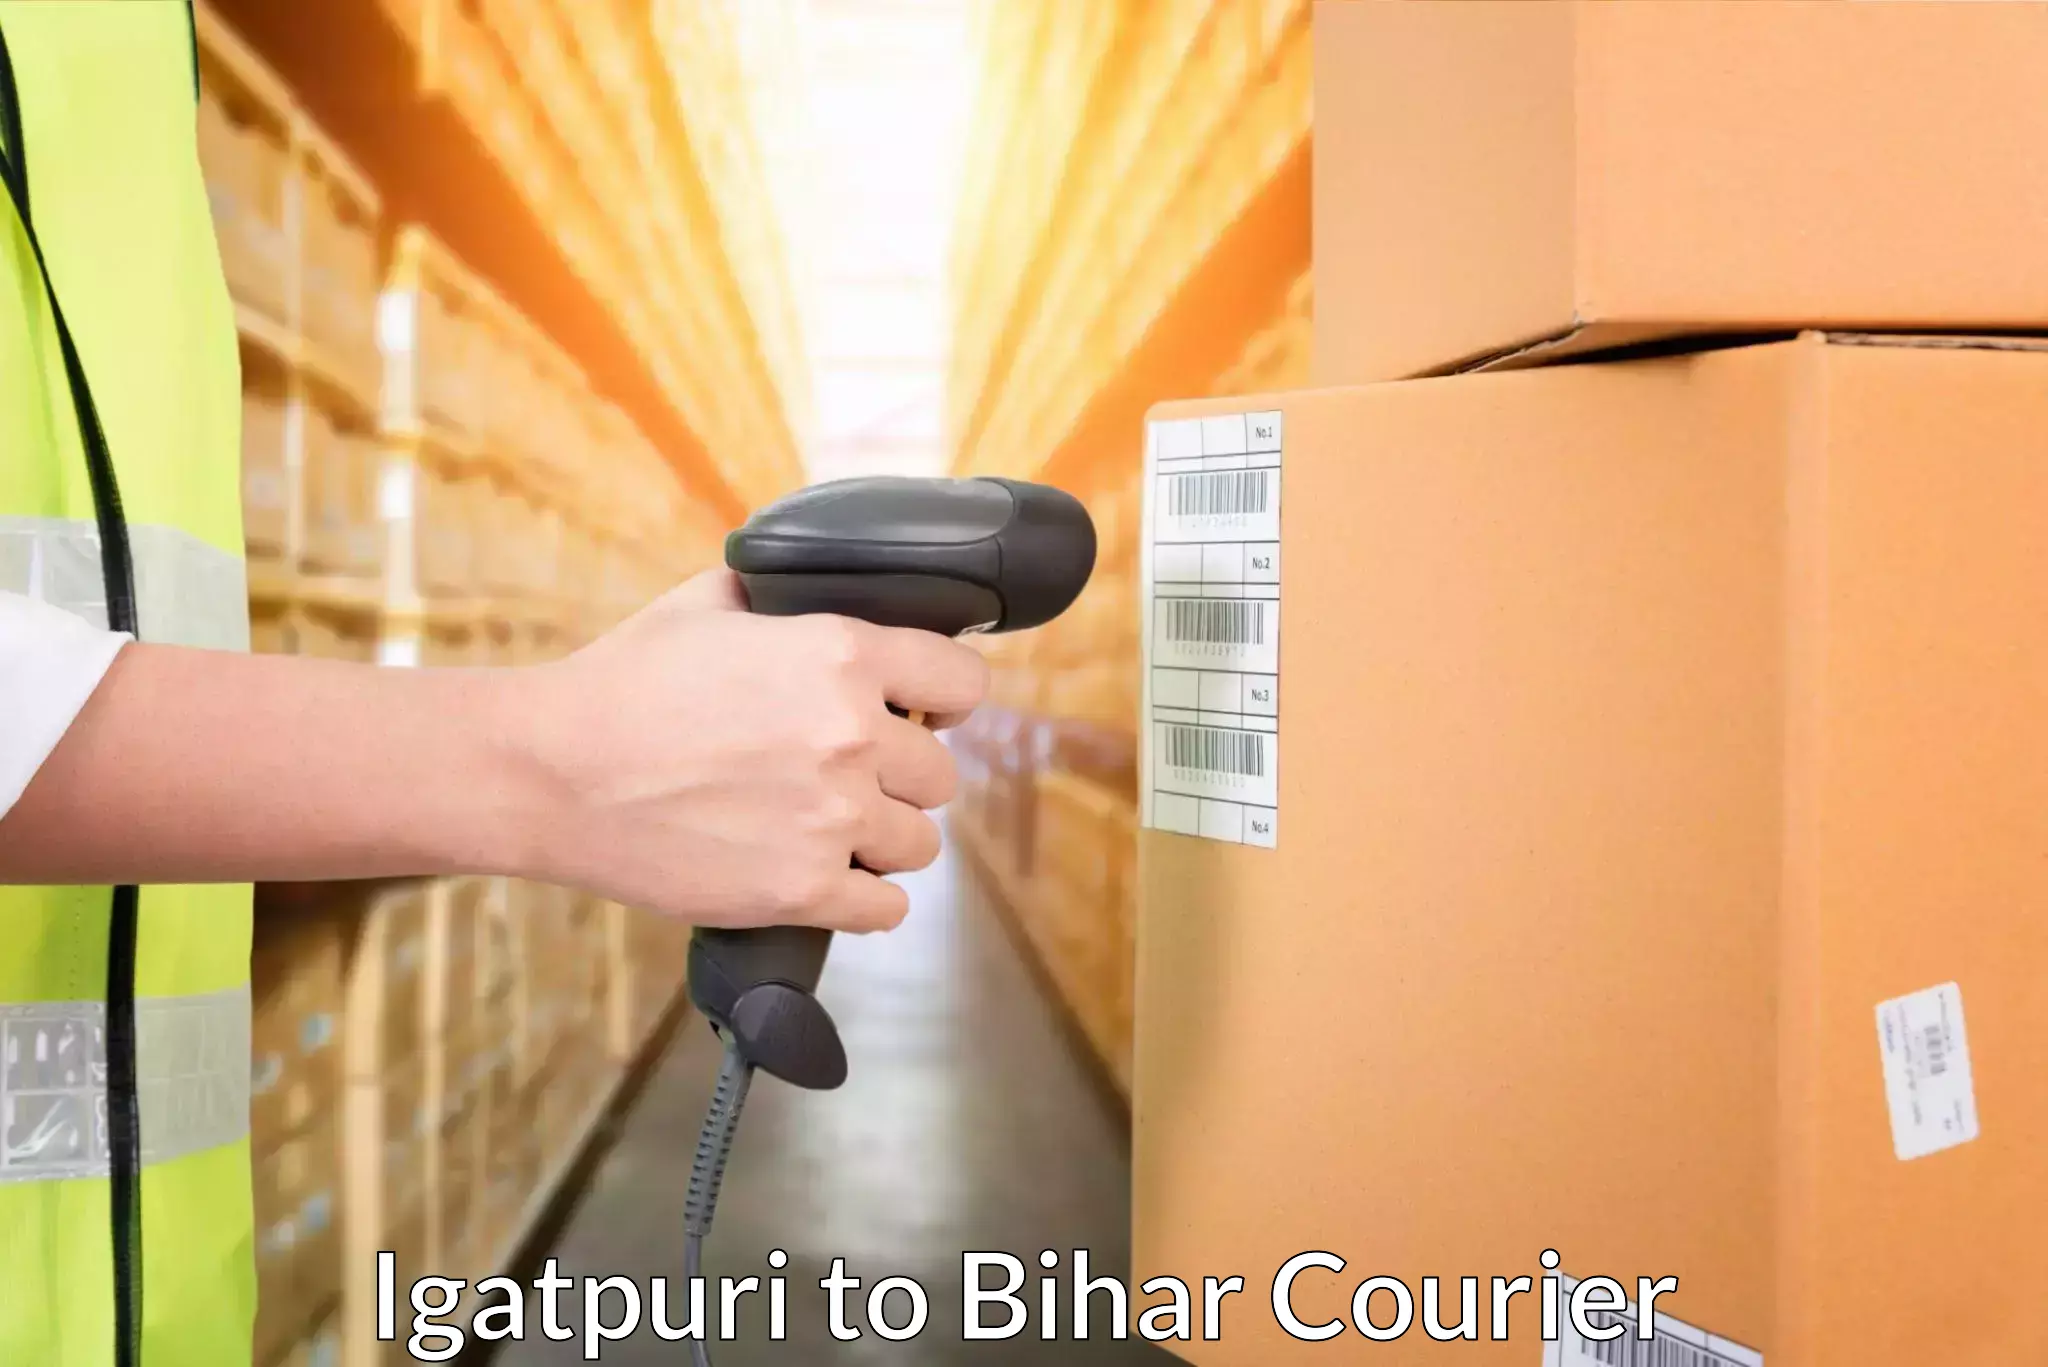 User-friendly delivery service Igatpuri to Bihar